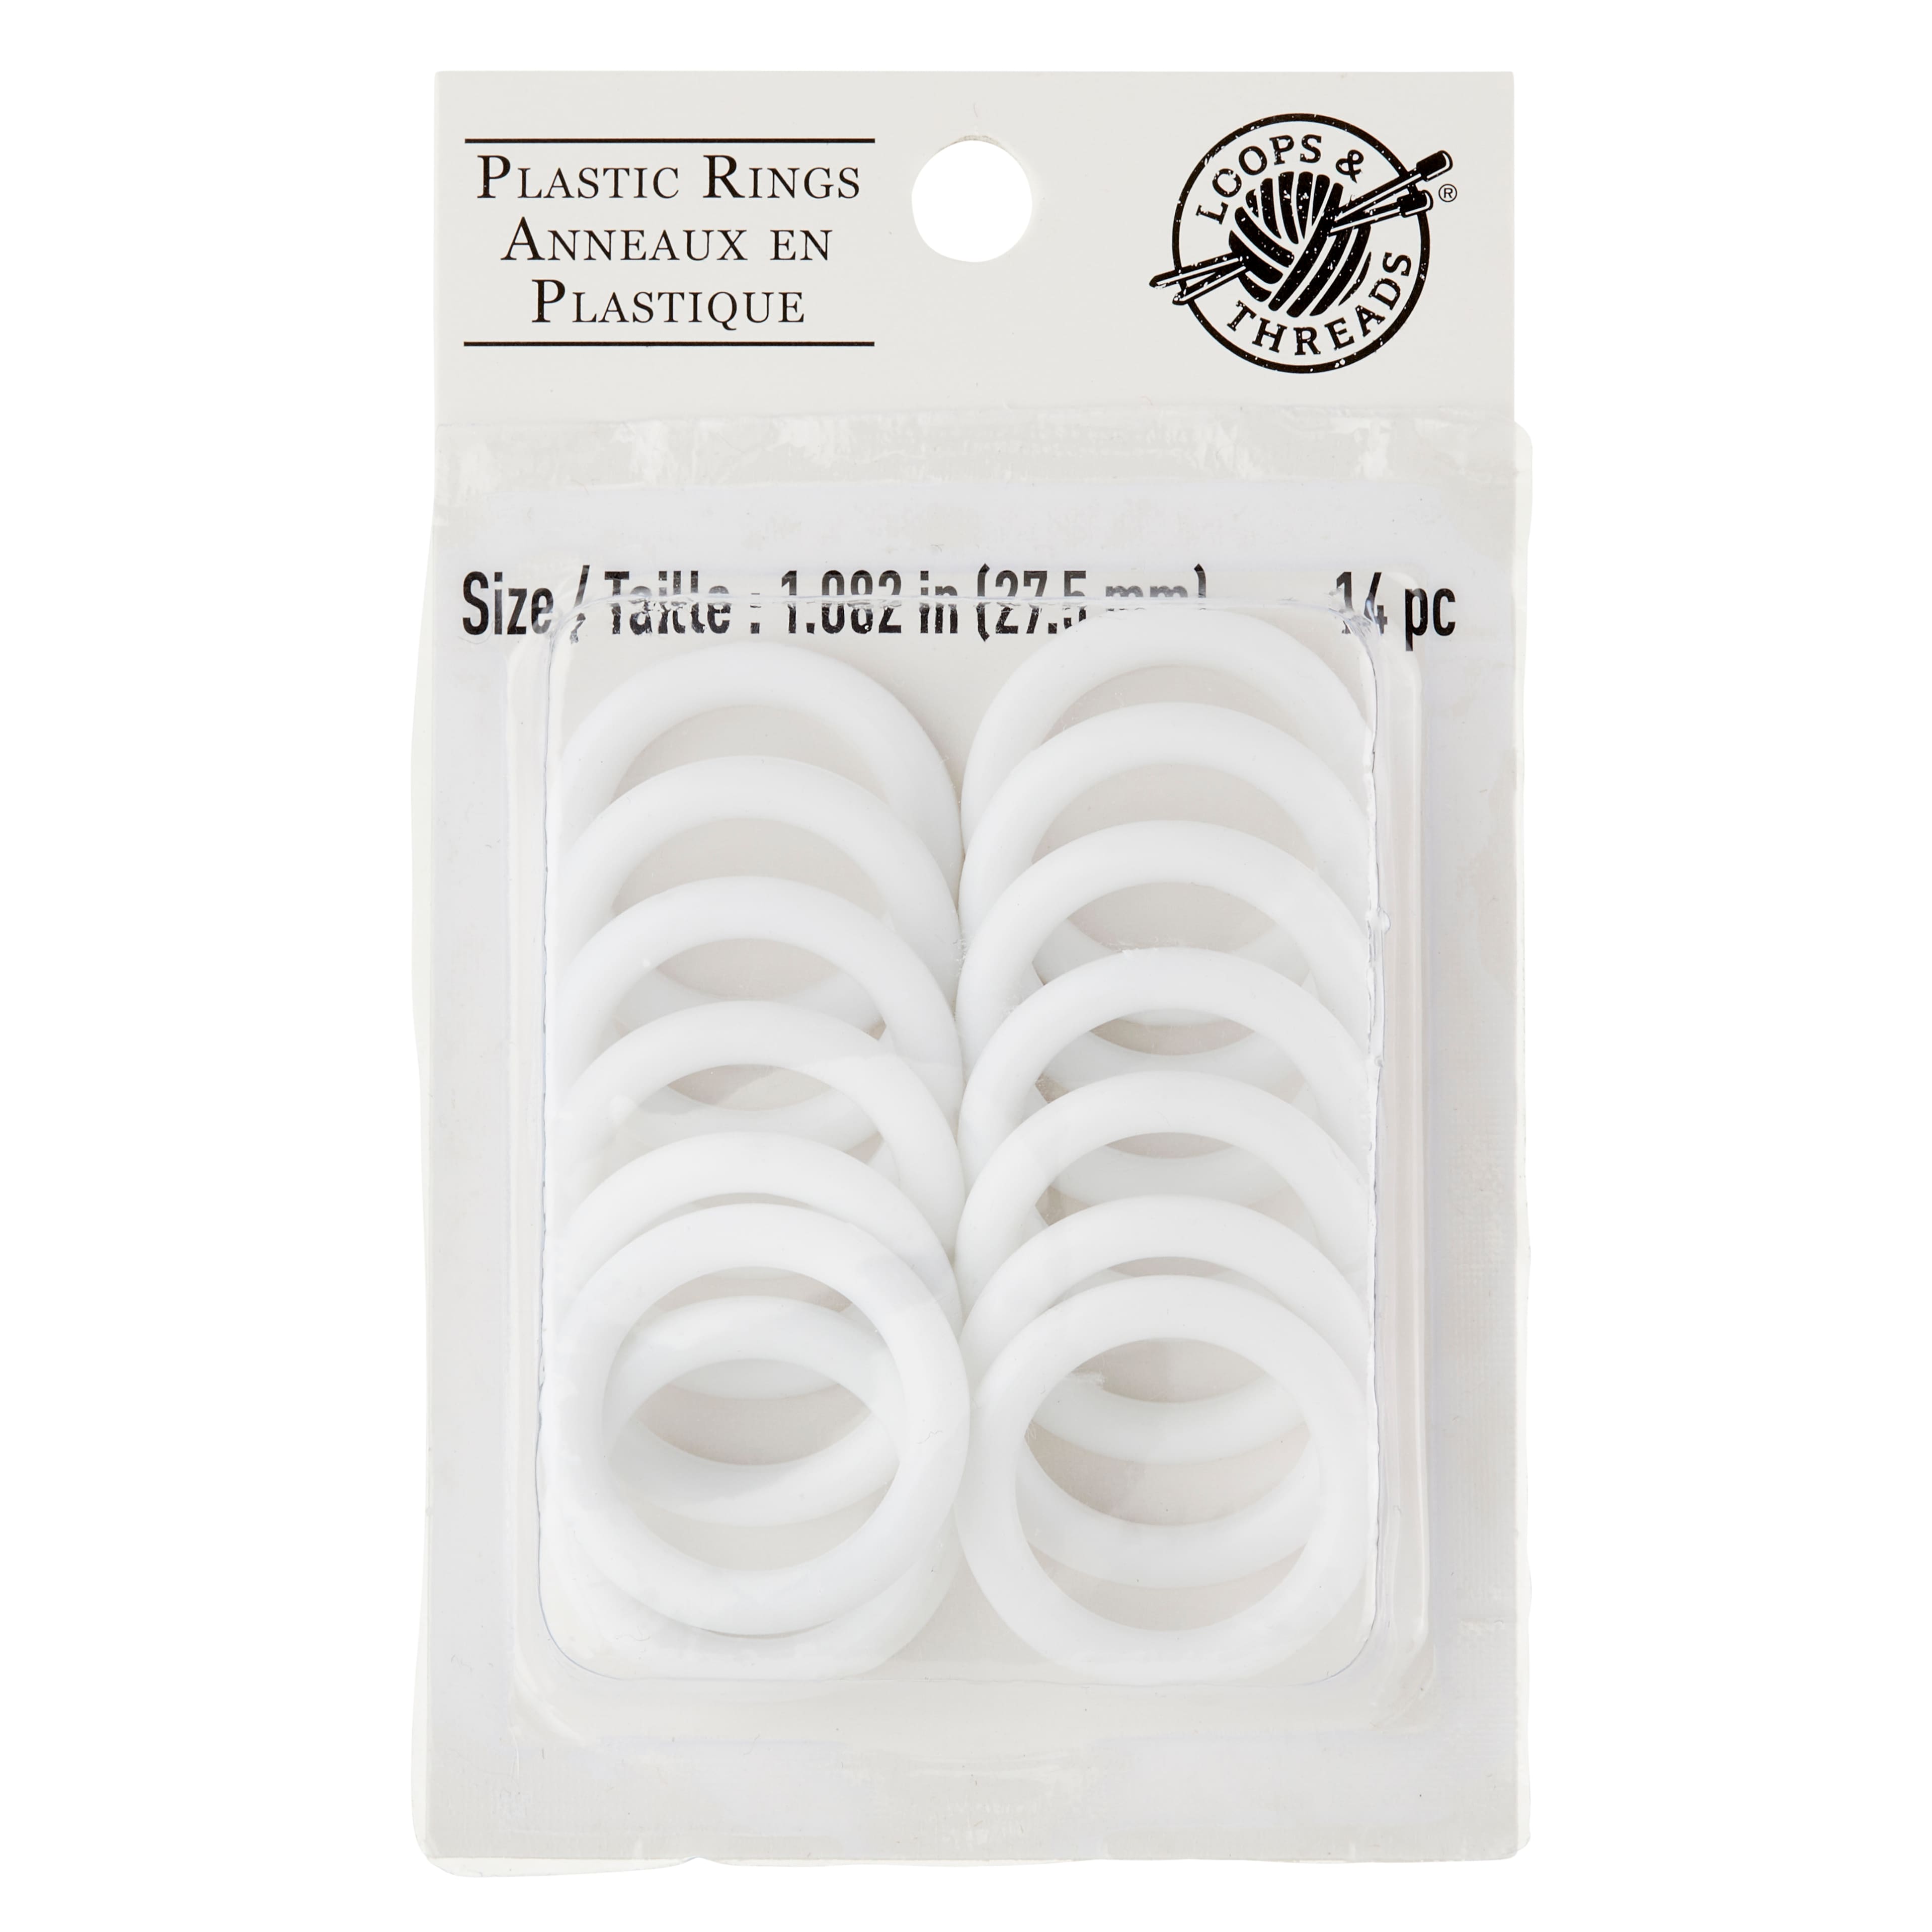 12 Packs: 14 Ct. (168 Total) Plastic Rings by Loops & Threads, Size: 1.125, White